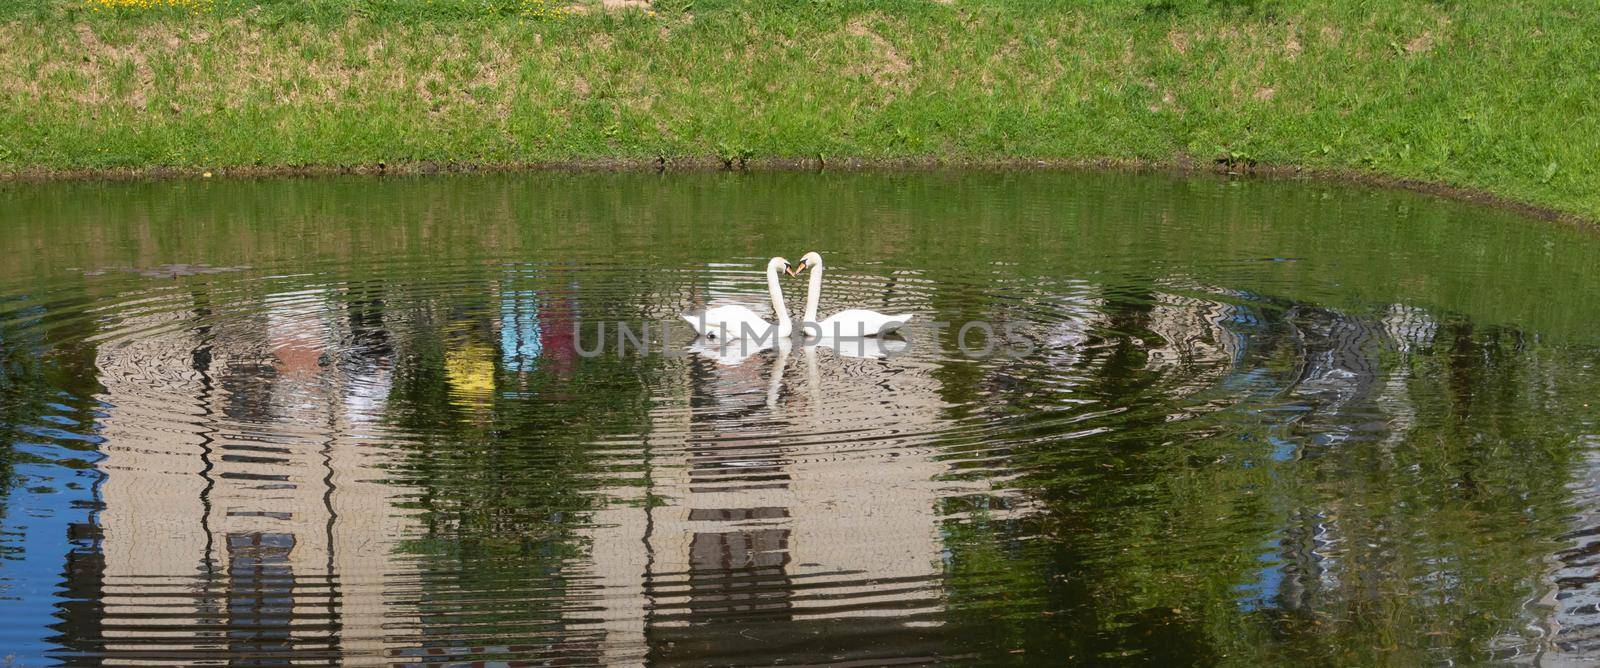 On the city pond, floating swans arched their necks in the shape of hearts by lapushka62